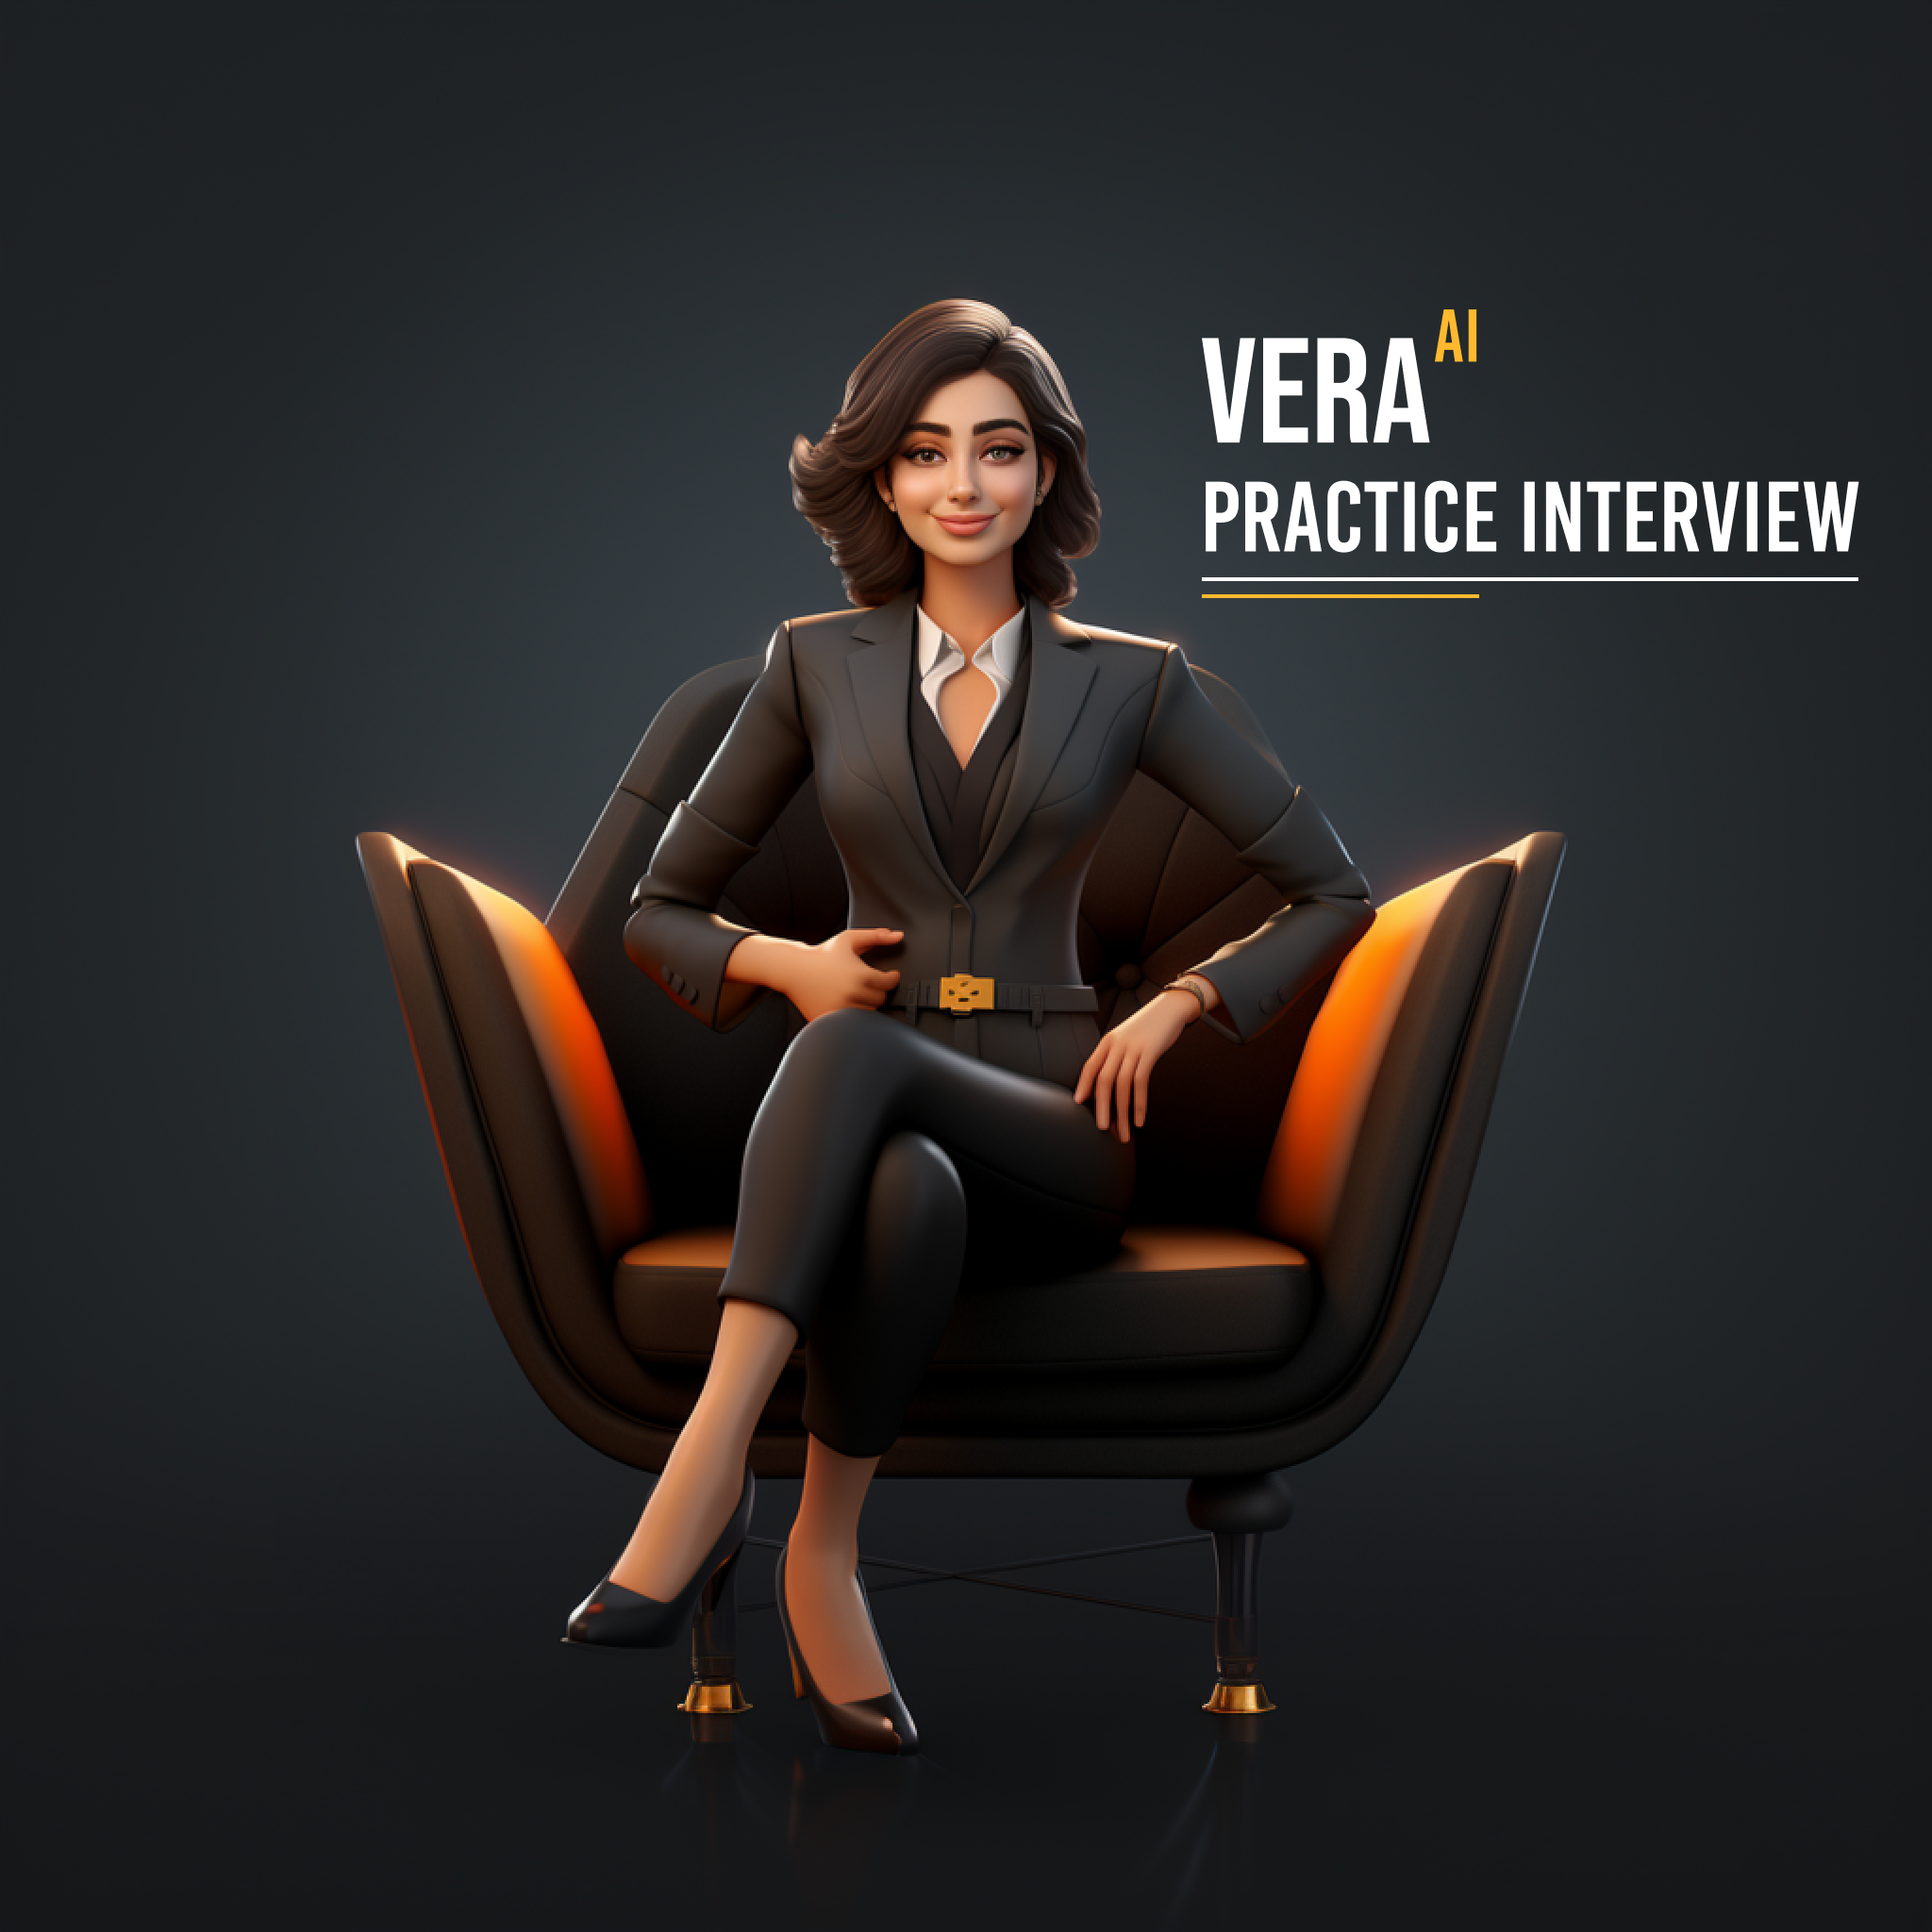 Practice Interview with VERA (AI Coach) logo